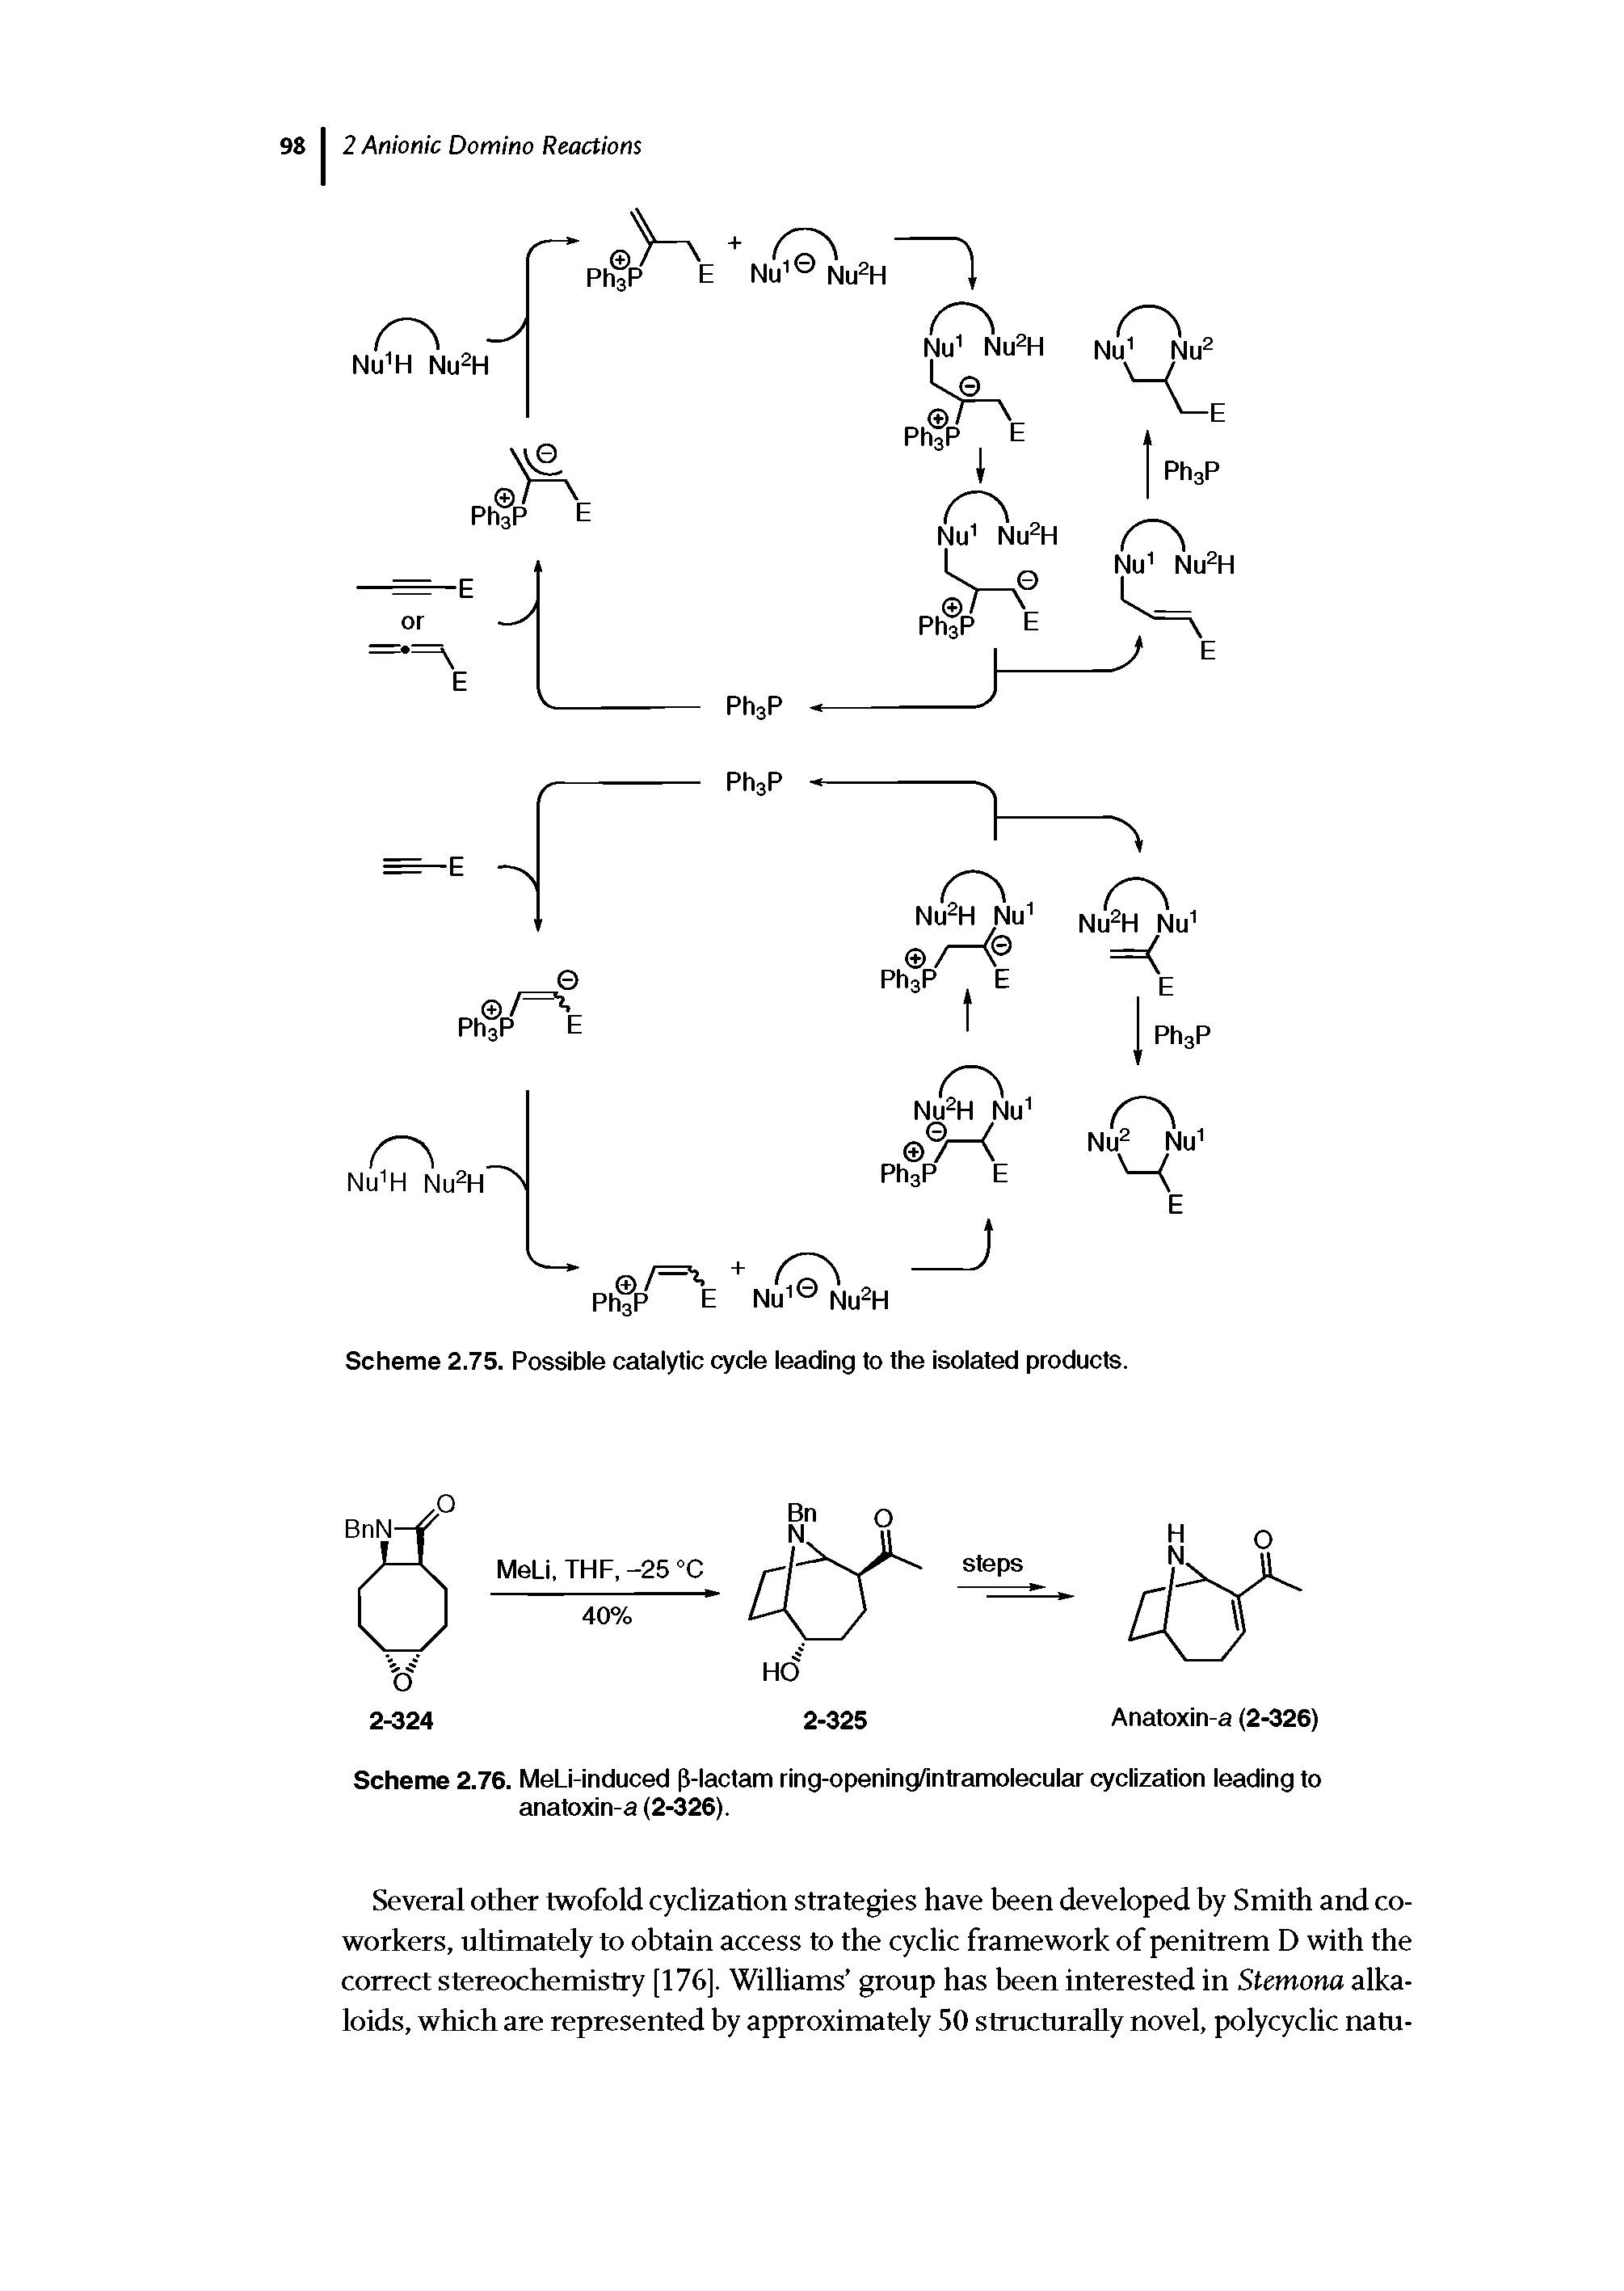 Scheme 2.75. Possible catalytic cycle leading to the isolated products.